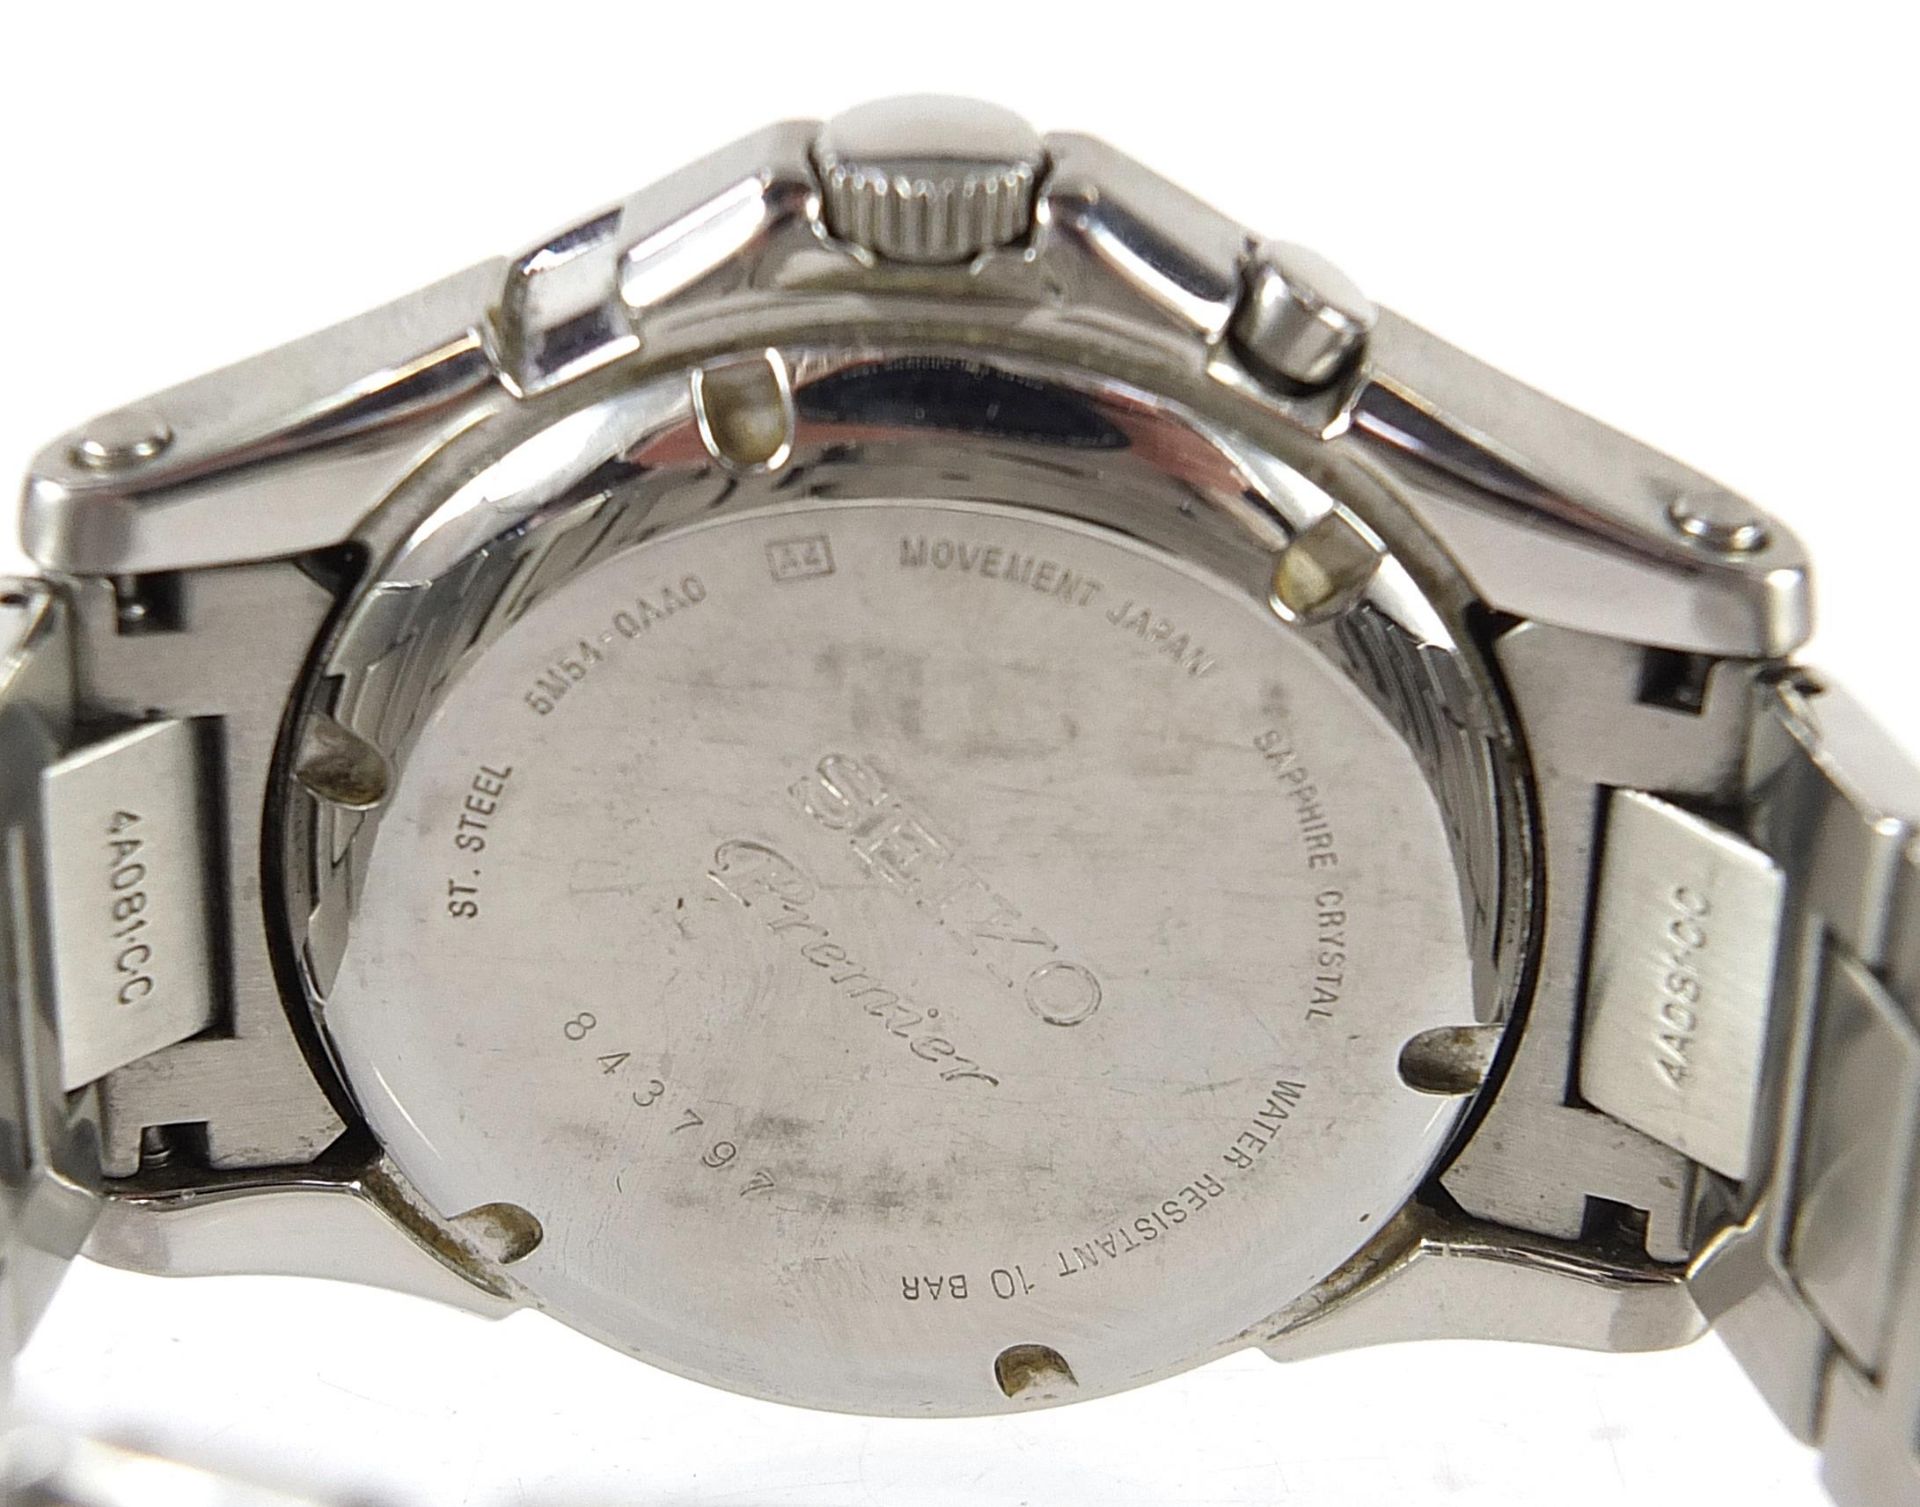 Seiko, gentlemen's Seiko Premier kinetic wristwatch with date aperture with box and original receipt - Image 3 of 6